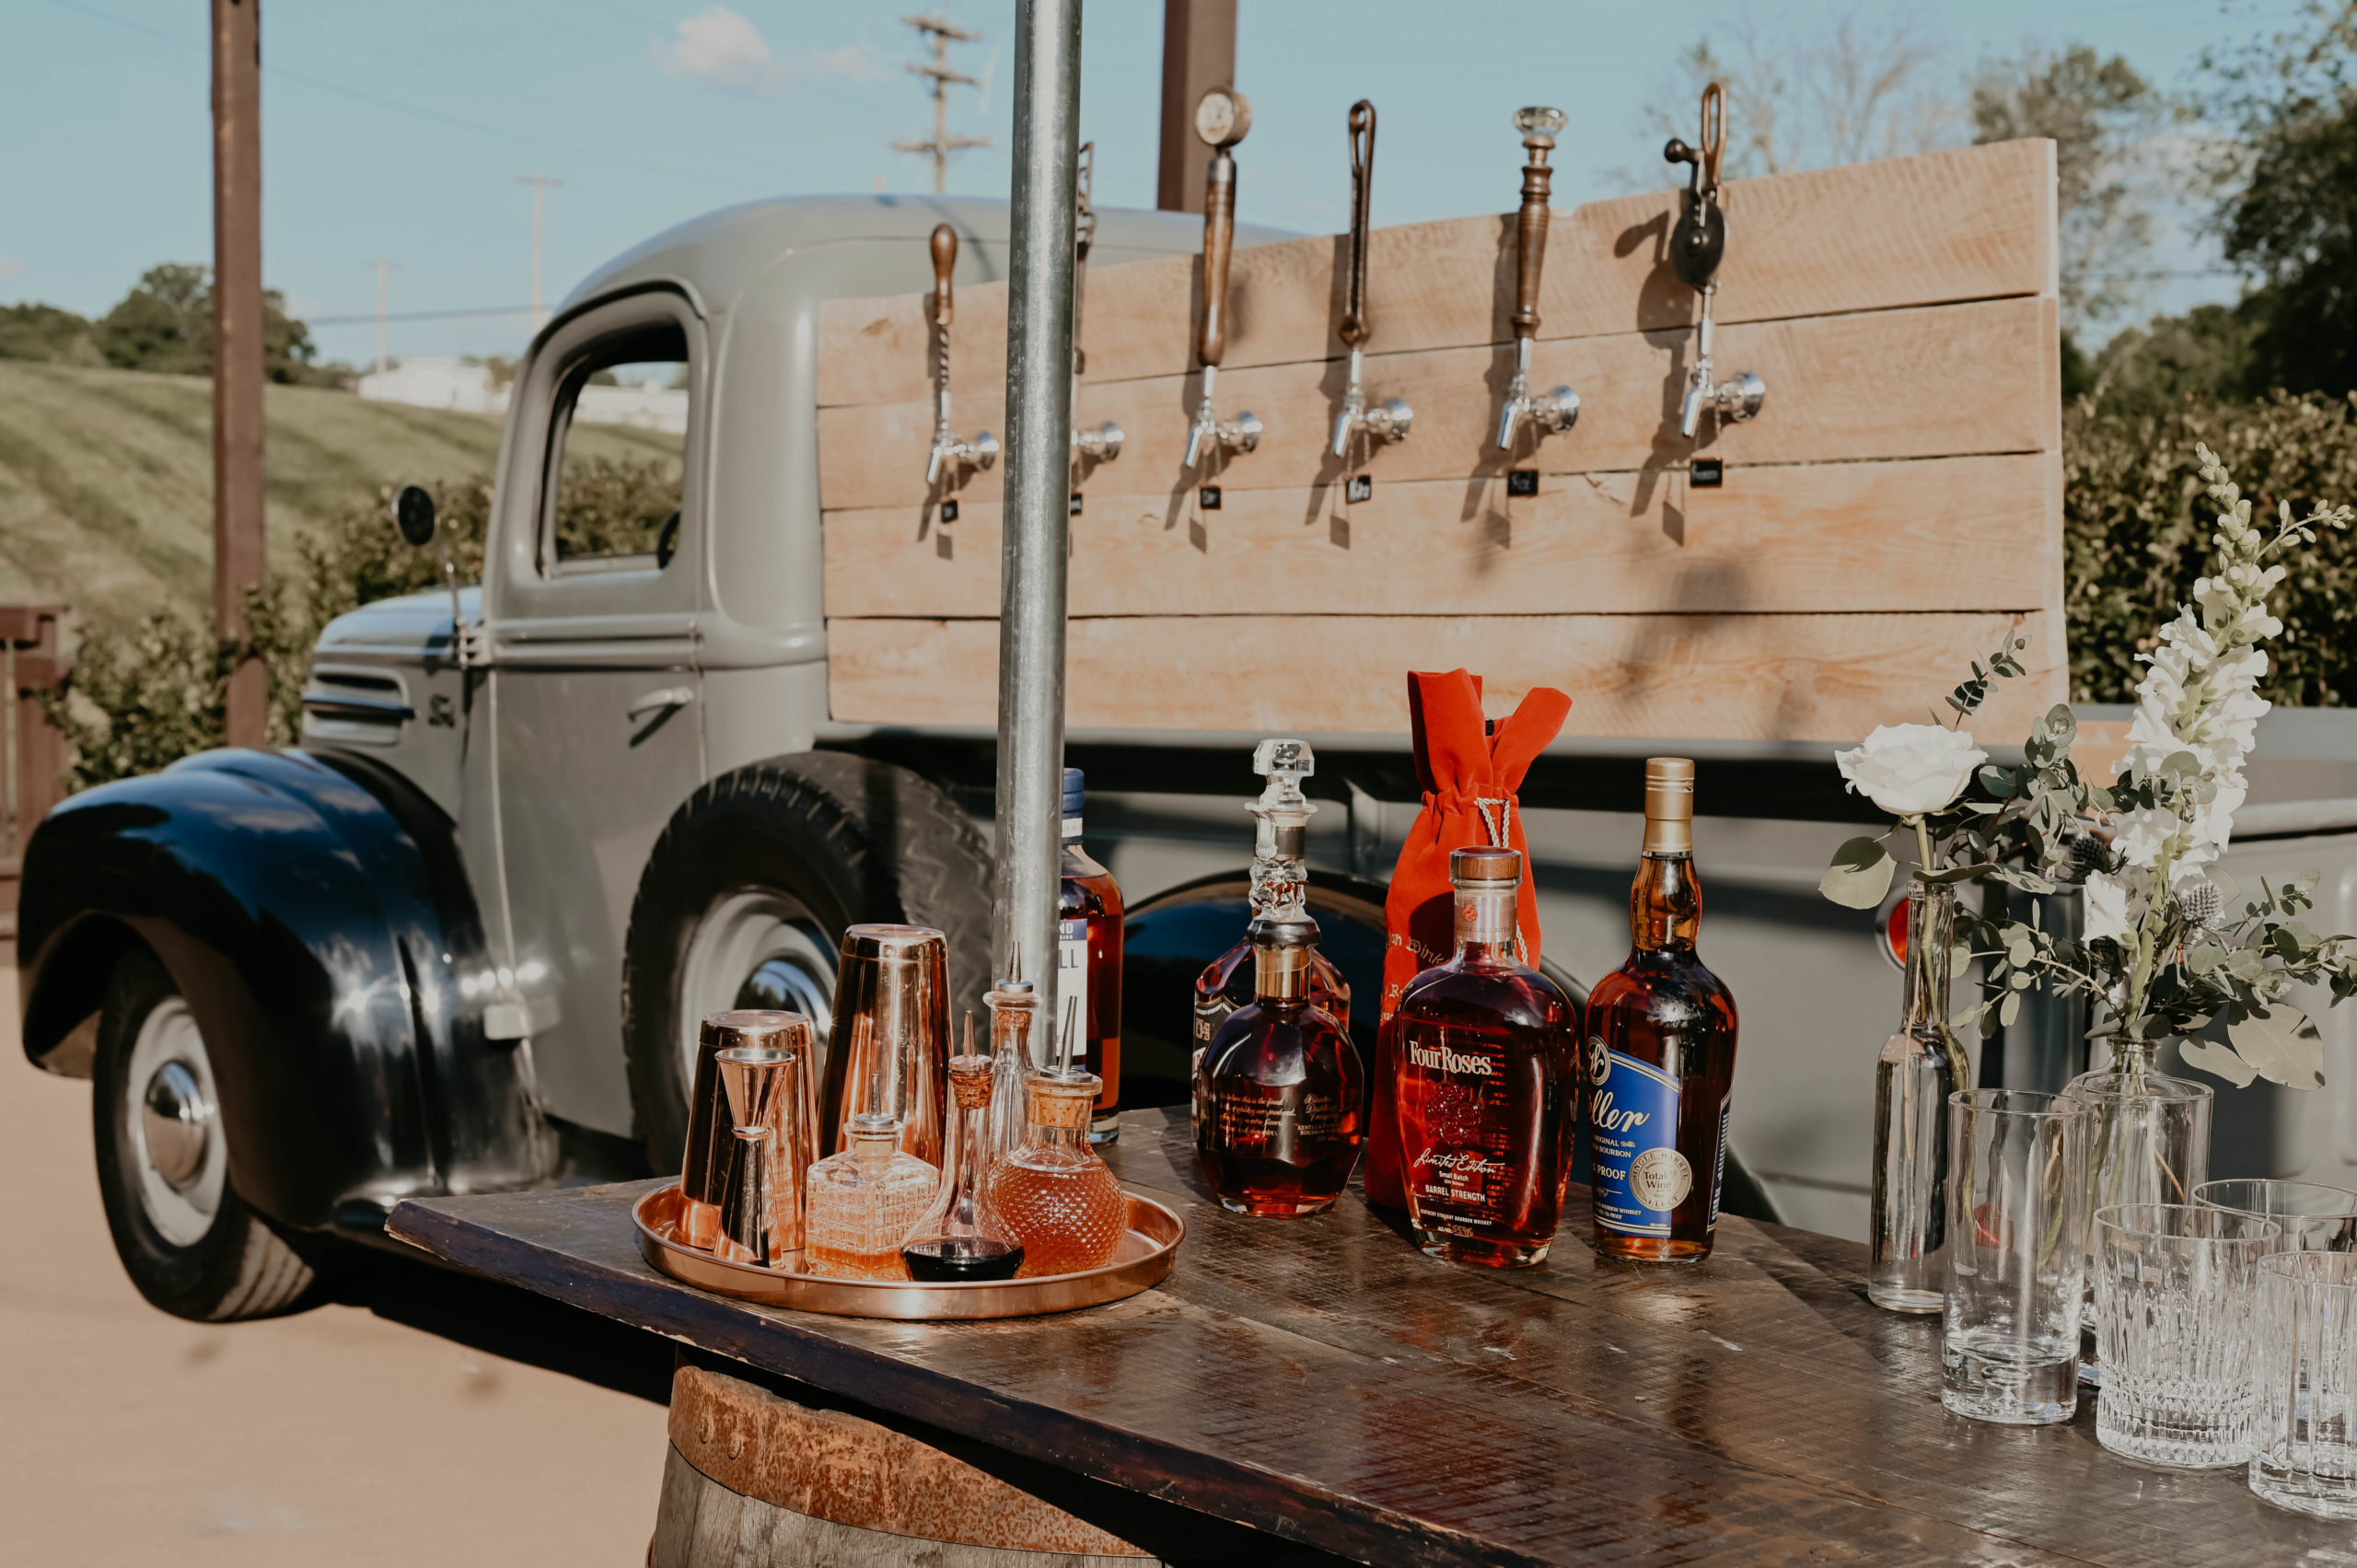 The taps on the Proper Pour Events mobile bar Ford truck.